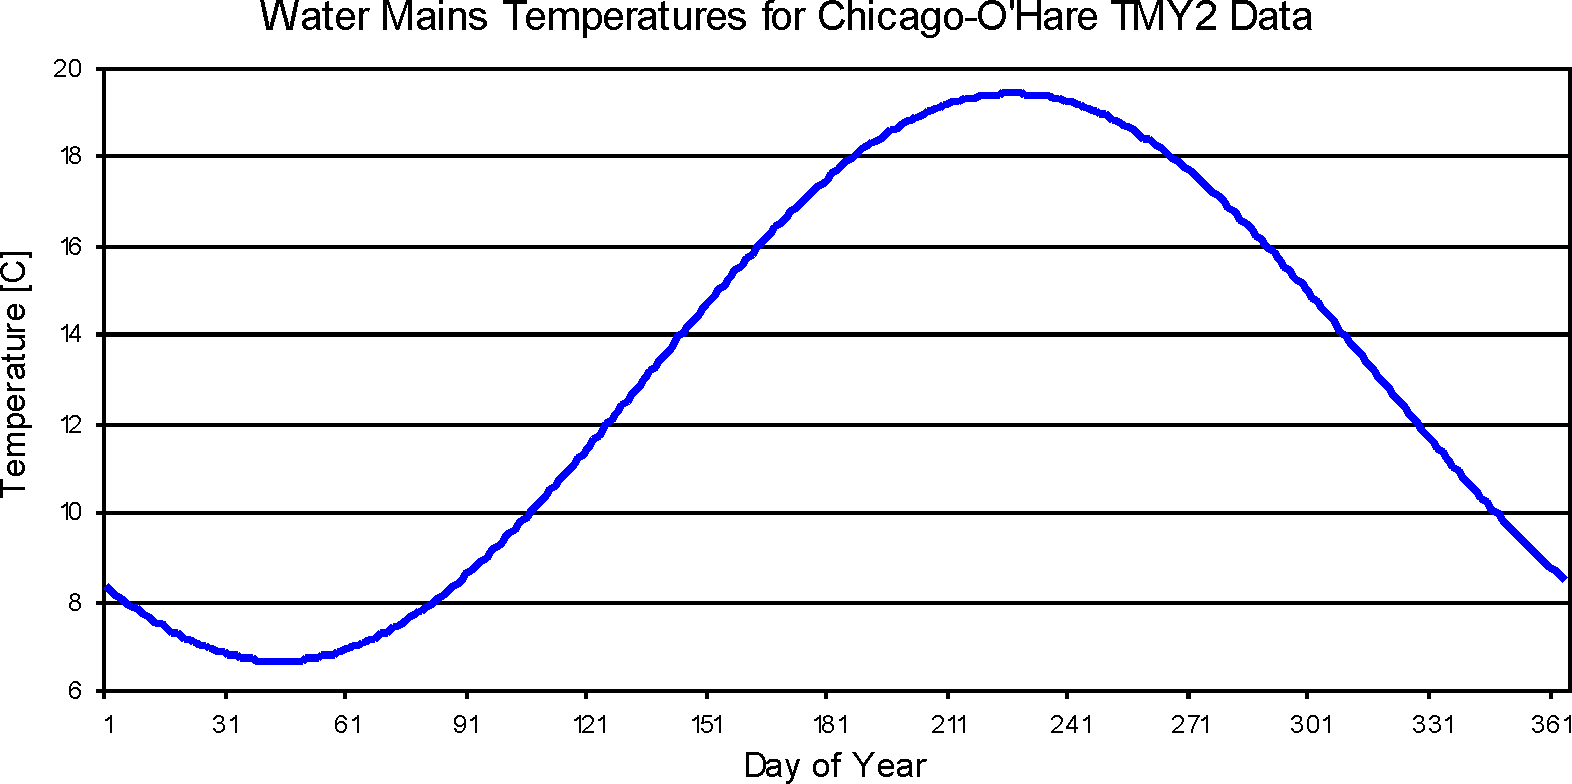 Water Mains Temperatures for Chicago-O’Hare TMY2 Data [fig:water-mains-temperatures-chicago-ohare-TMY2]